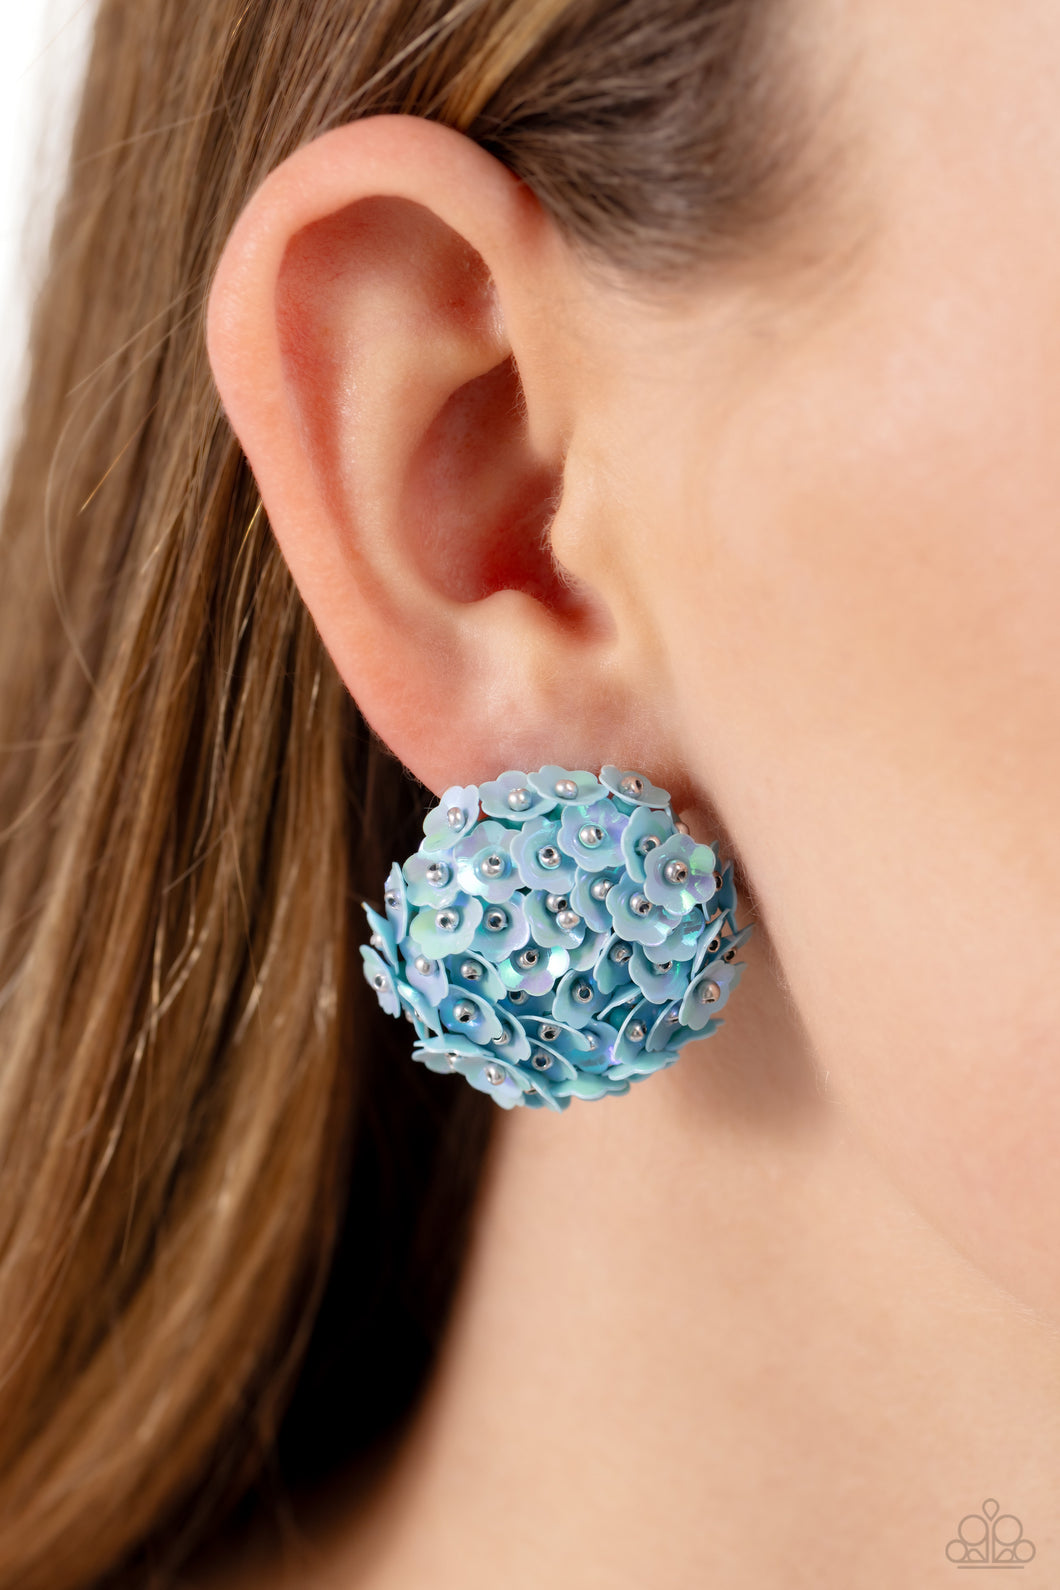 Featuring a light iridescent sheen, light blue flowers with silver stud centers explode around the ear to create a whimsical bouquet-inspired statement. Earring attaches to a standard post fitting.  Sold as one pair of post earrings.